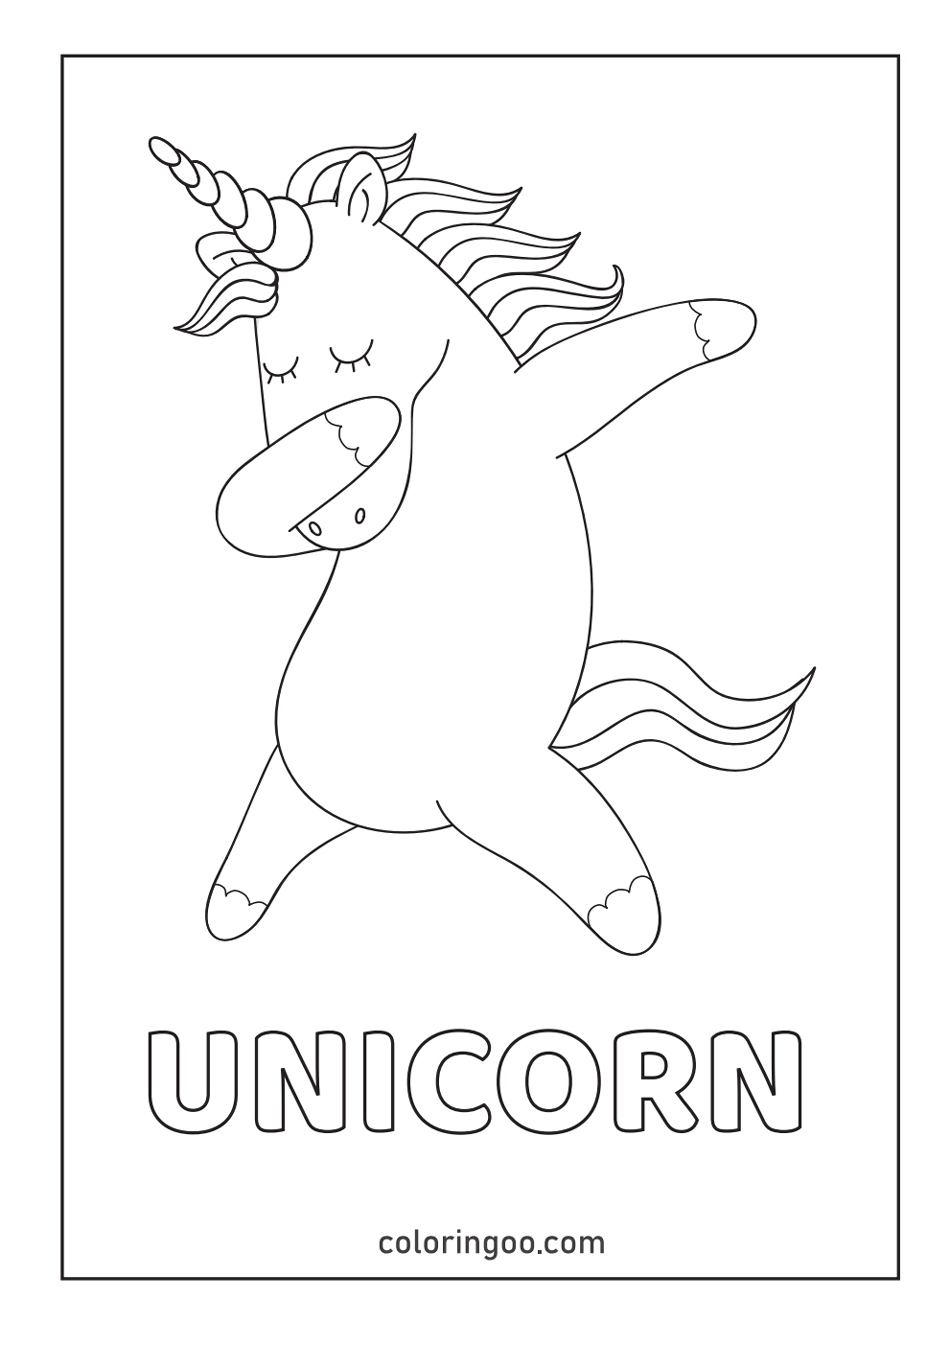 unicorn coloring pages 5